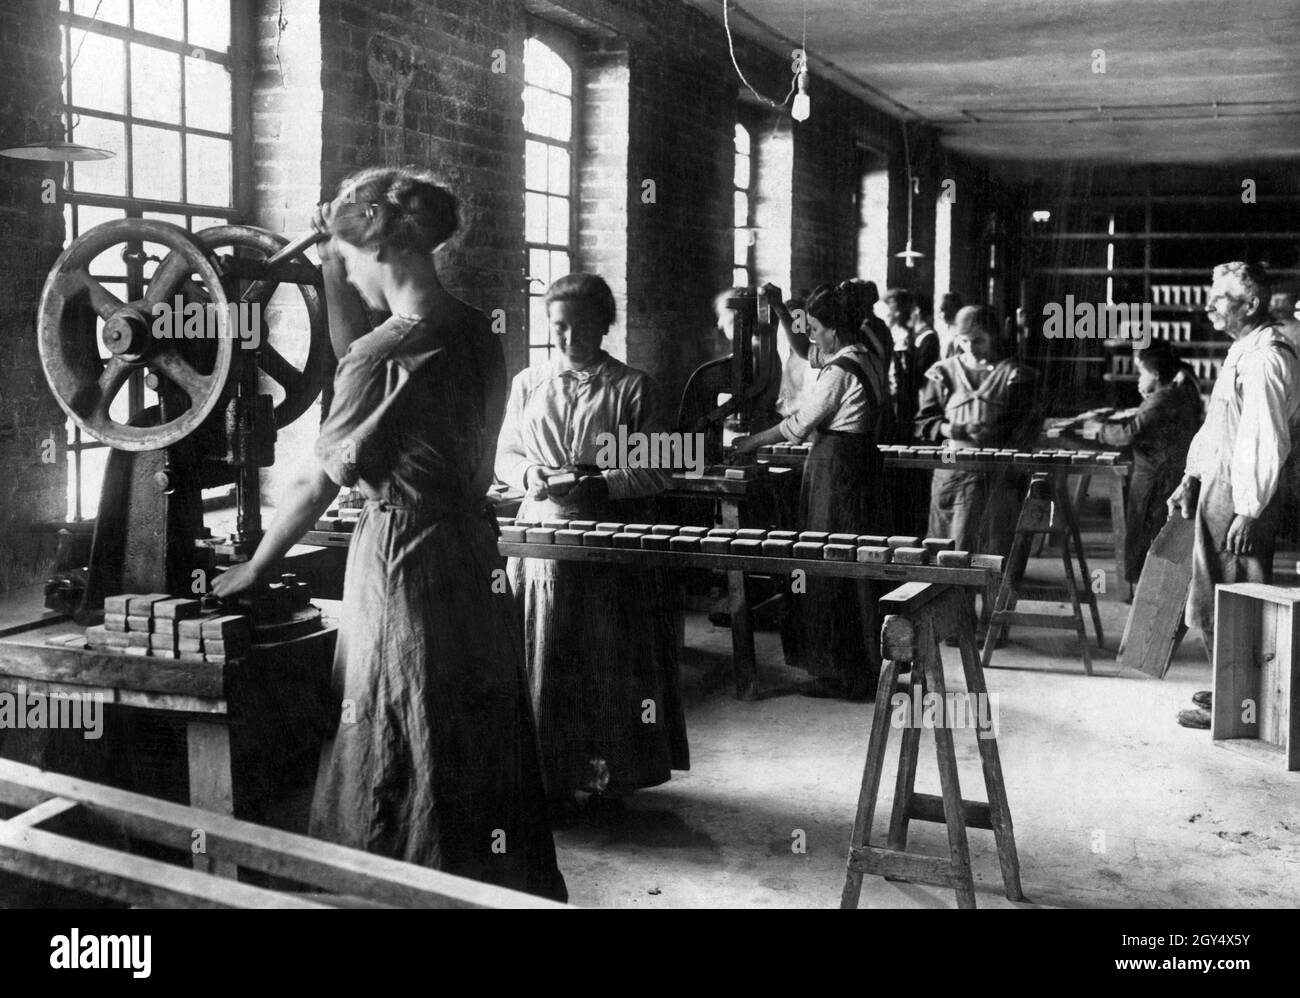 Workers making soap at the soap punch in wartime 1917. [automated translation] Stock Photo